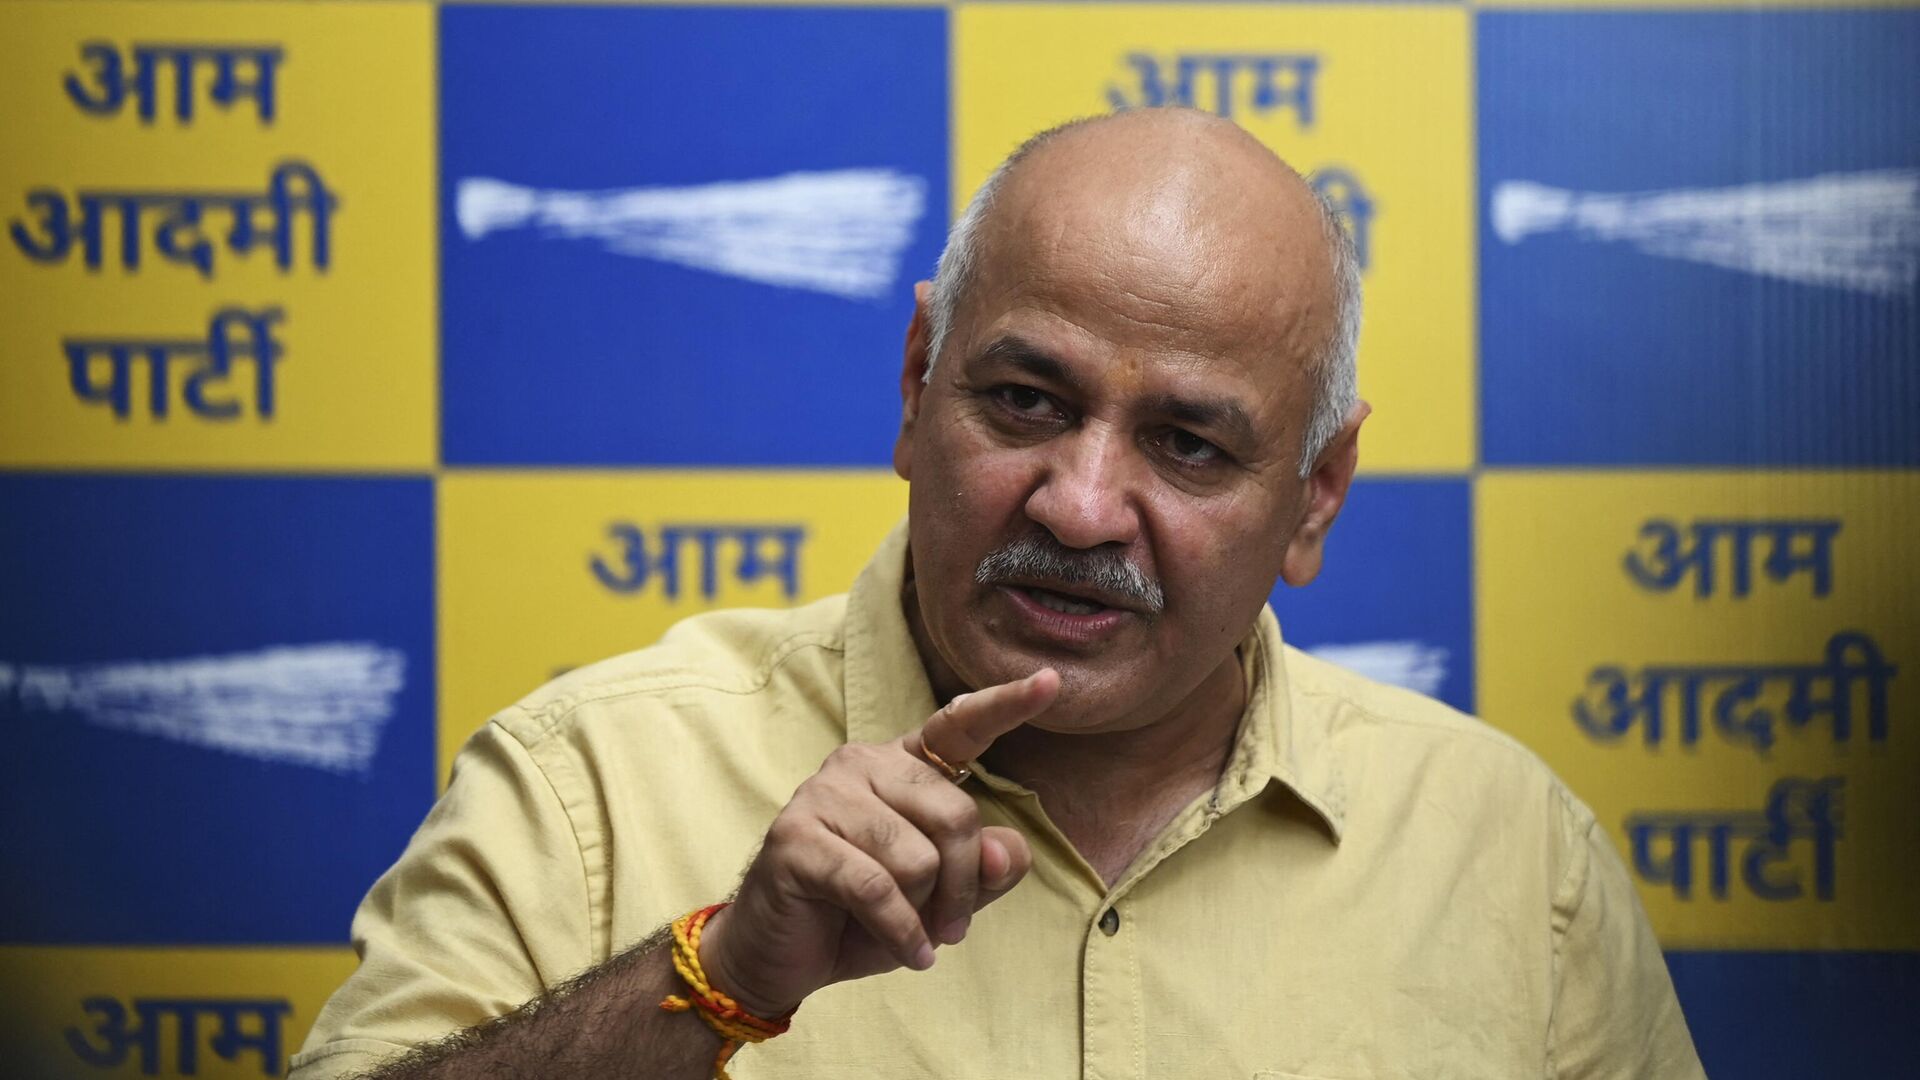 Delhi Deputy Chief Minister Manish Sisodia speaks during a press conference in New Delhi on August 20, 2022, after the Central Bureau of Investigation (CBI) had raided his home in relation to alleged irregularities with the implementation of the Excise Policy 2021-22.  - Sputnik India, 1920, 08.03.2023